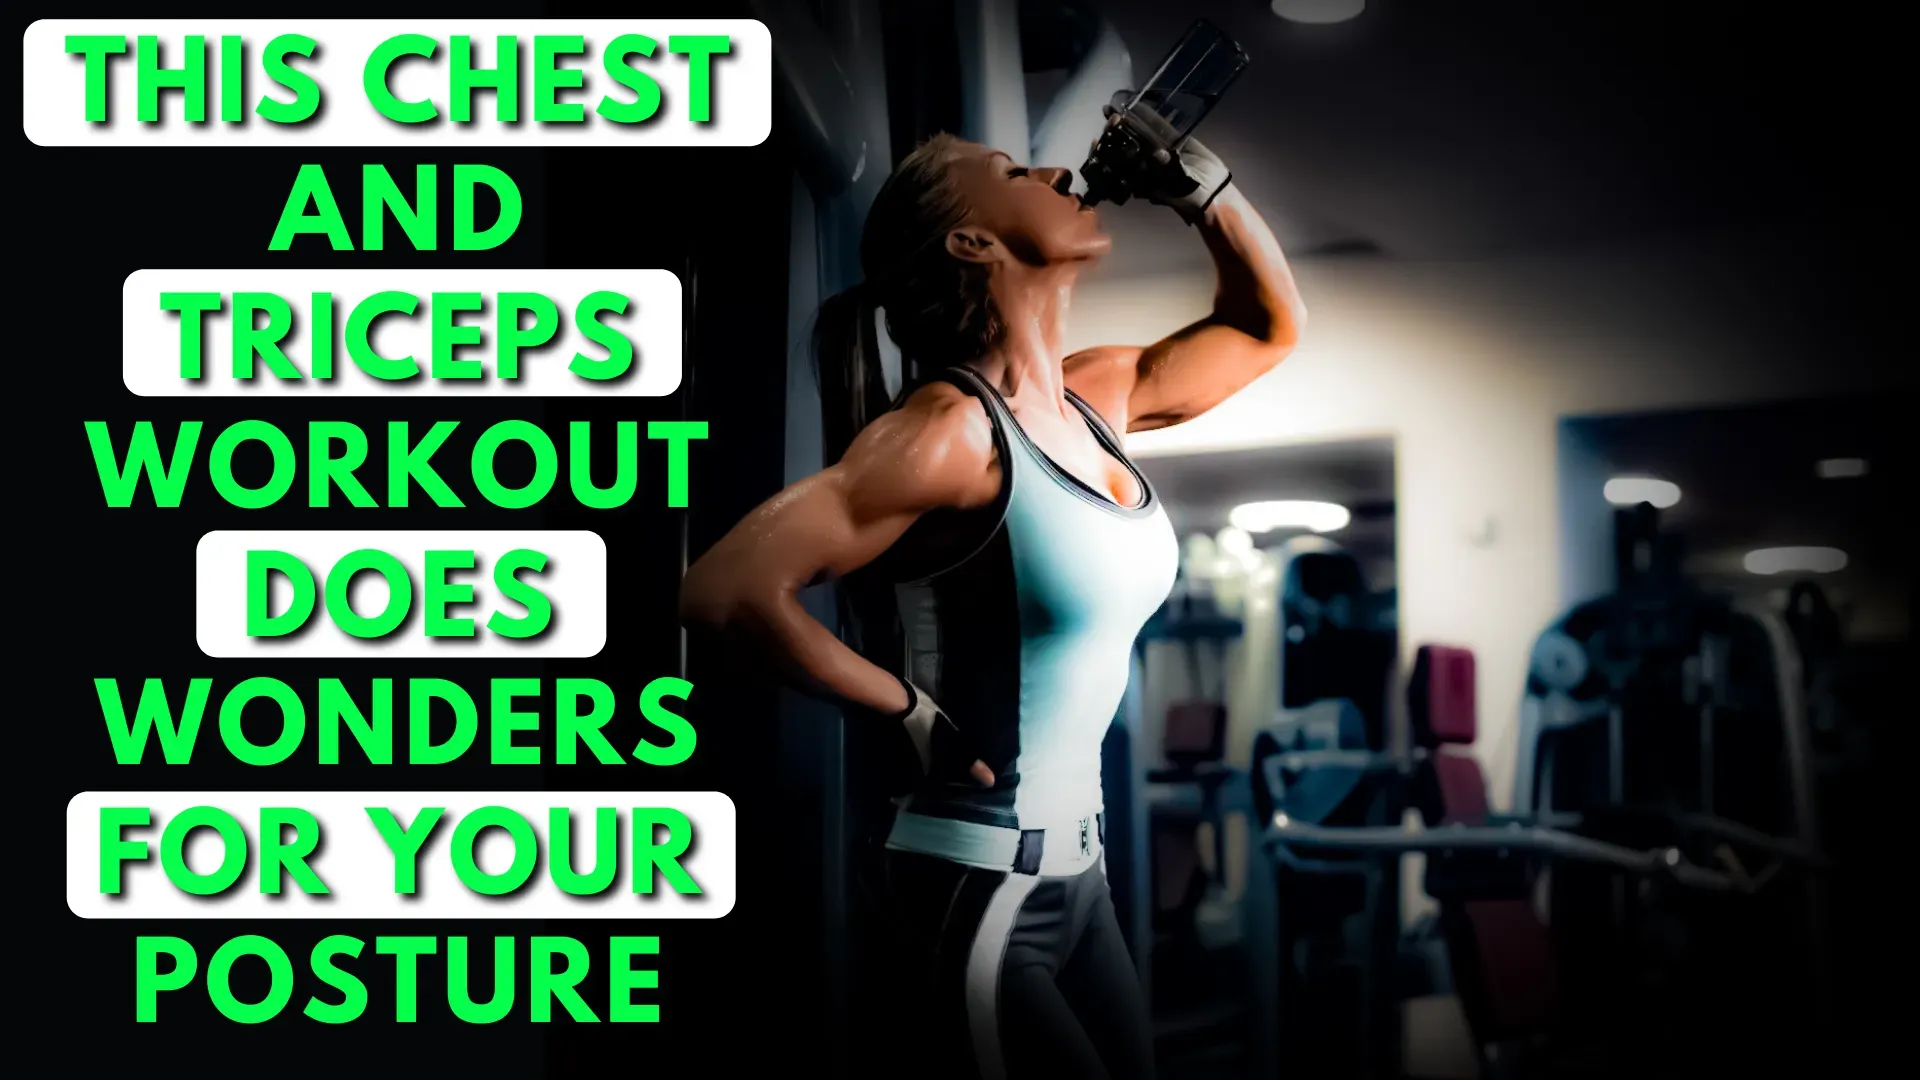 This Chest And Triceps Workout Does Wonder For Your Posture